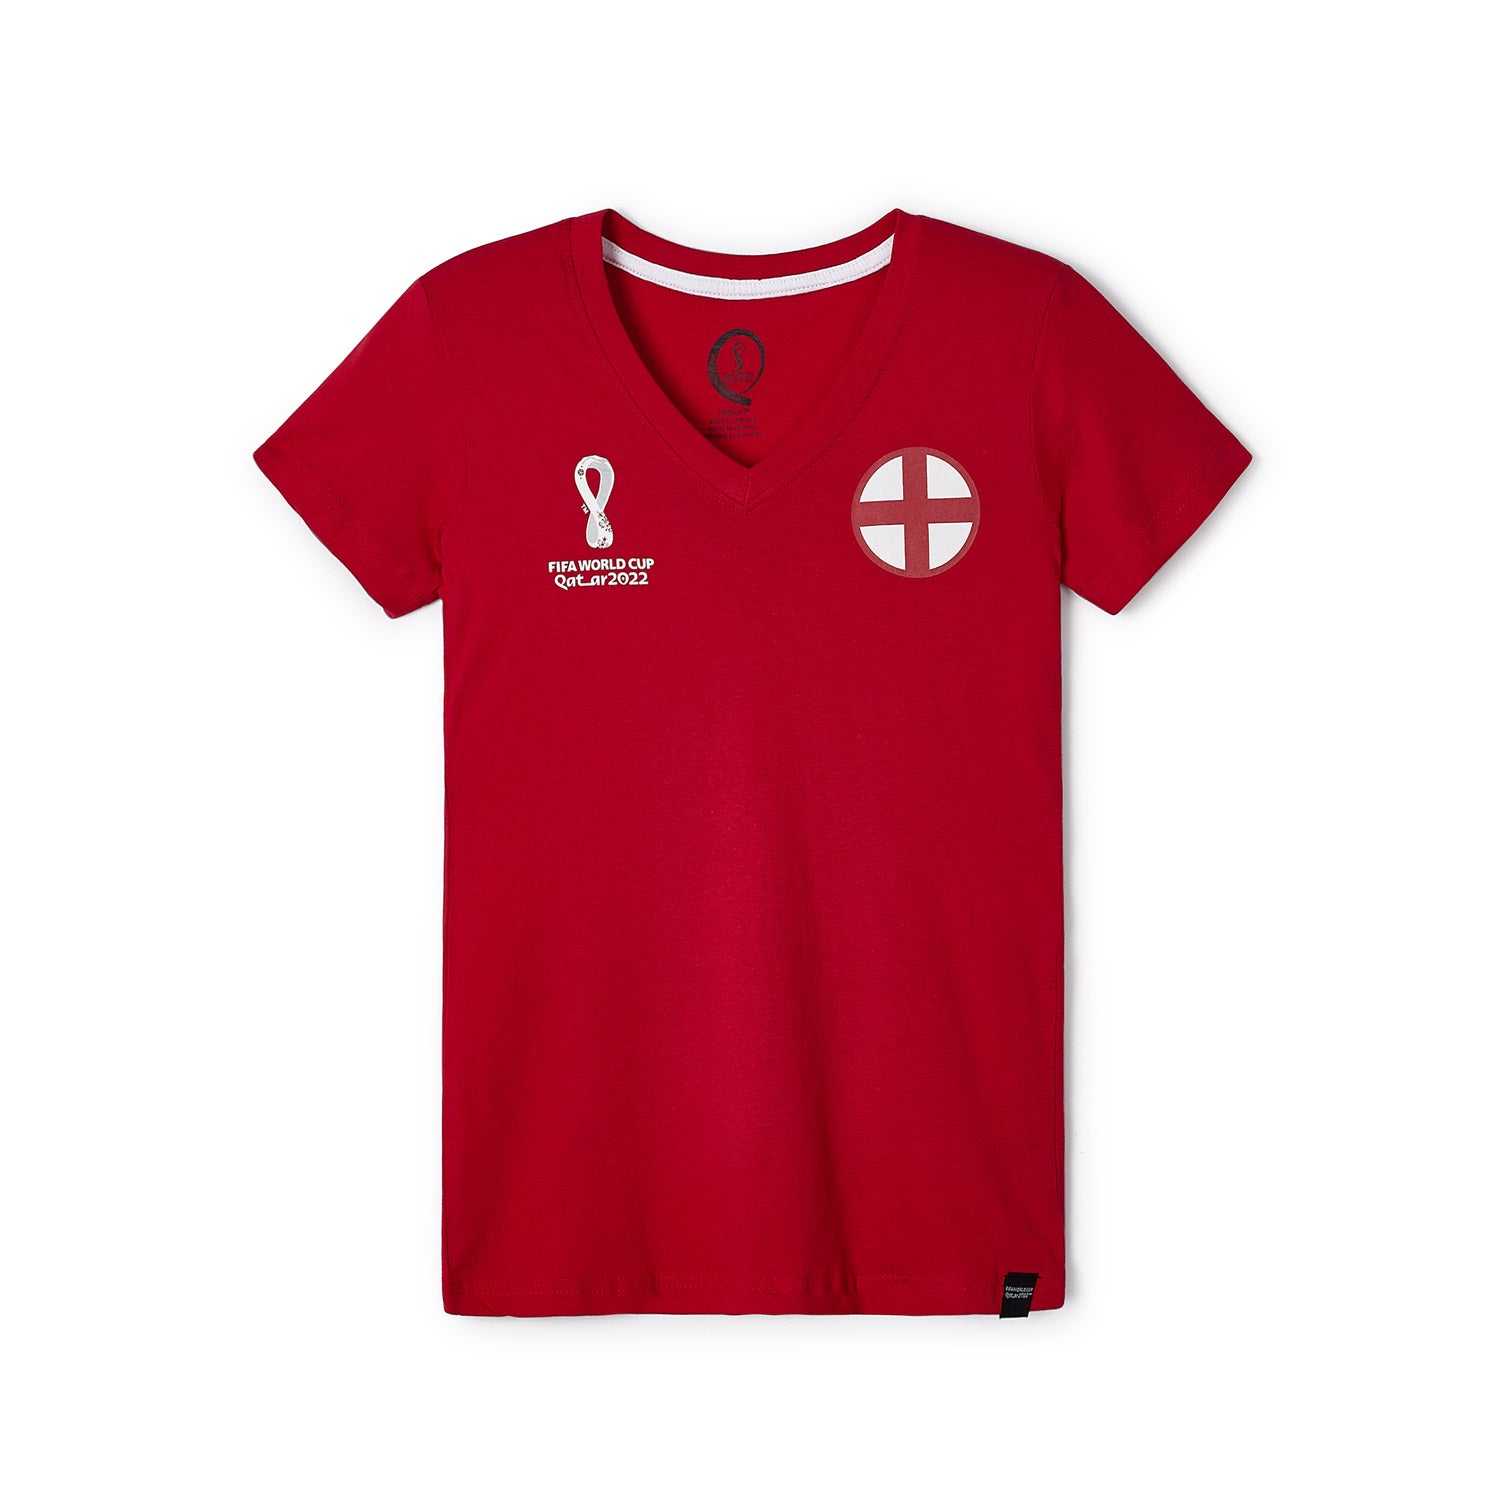 2022 World Cup England Red T-Shirt - Womens